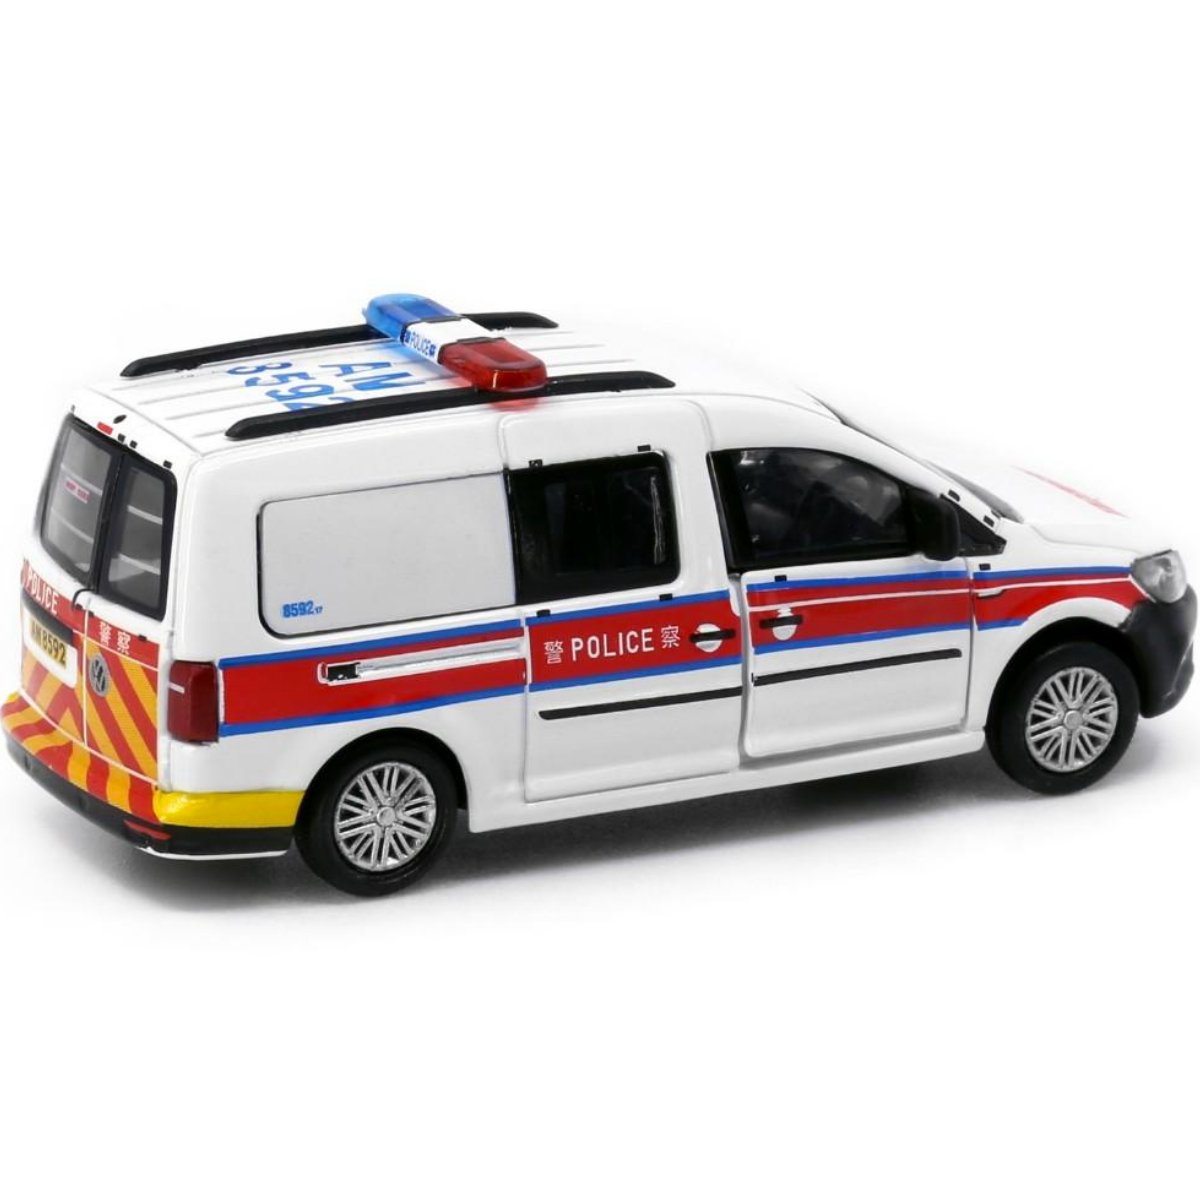 Tiny Models VW Caddy Hong Kong Police (1:64 Scale) - Phillips Hobbies